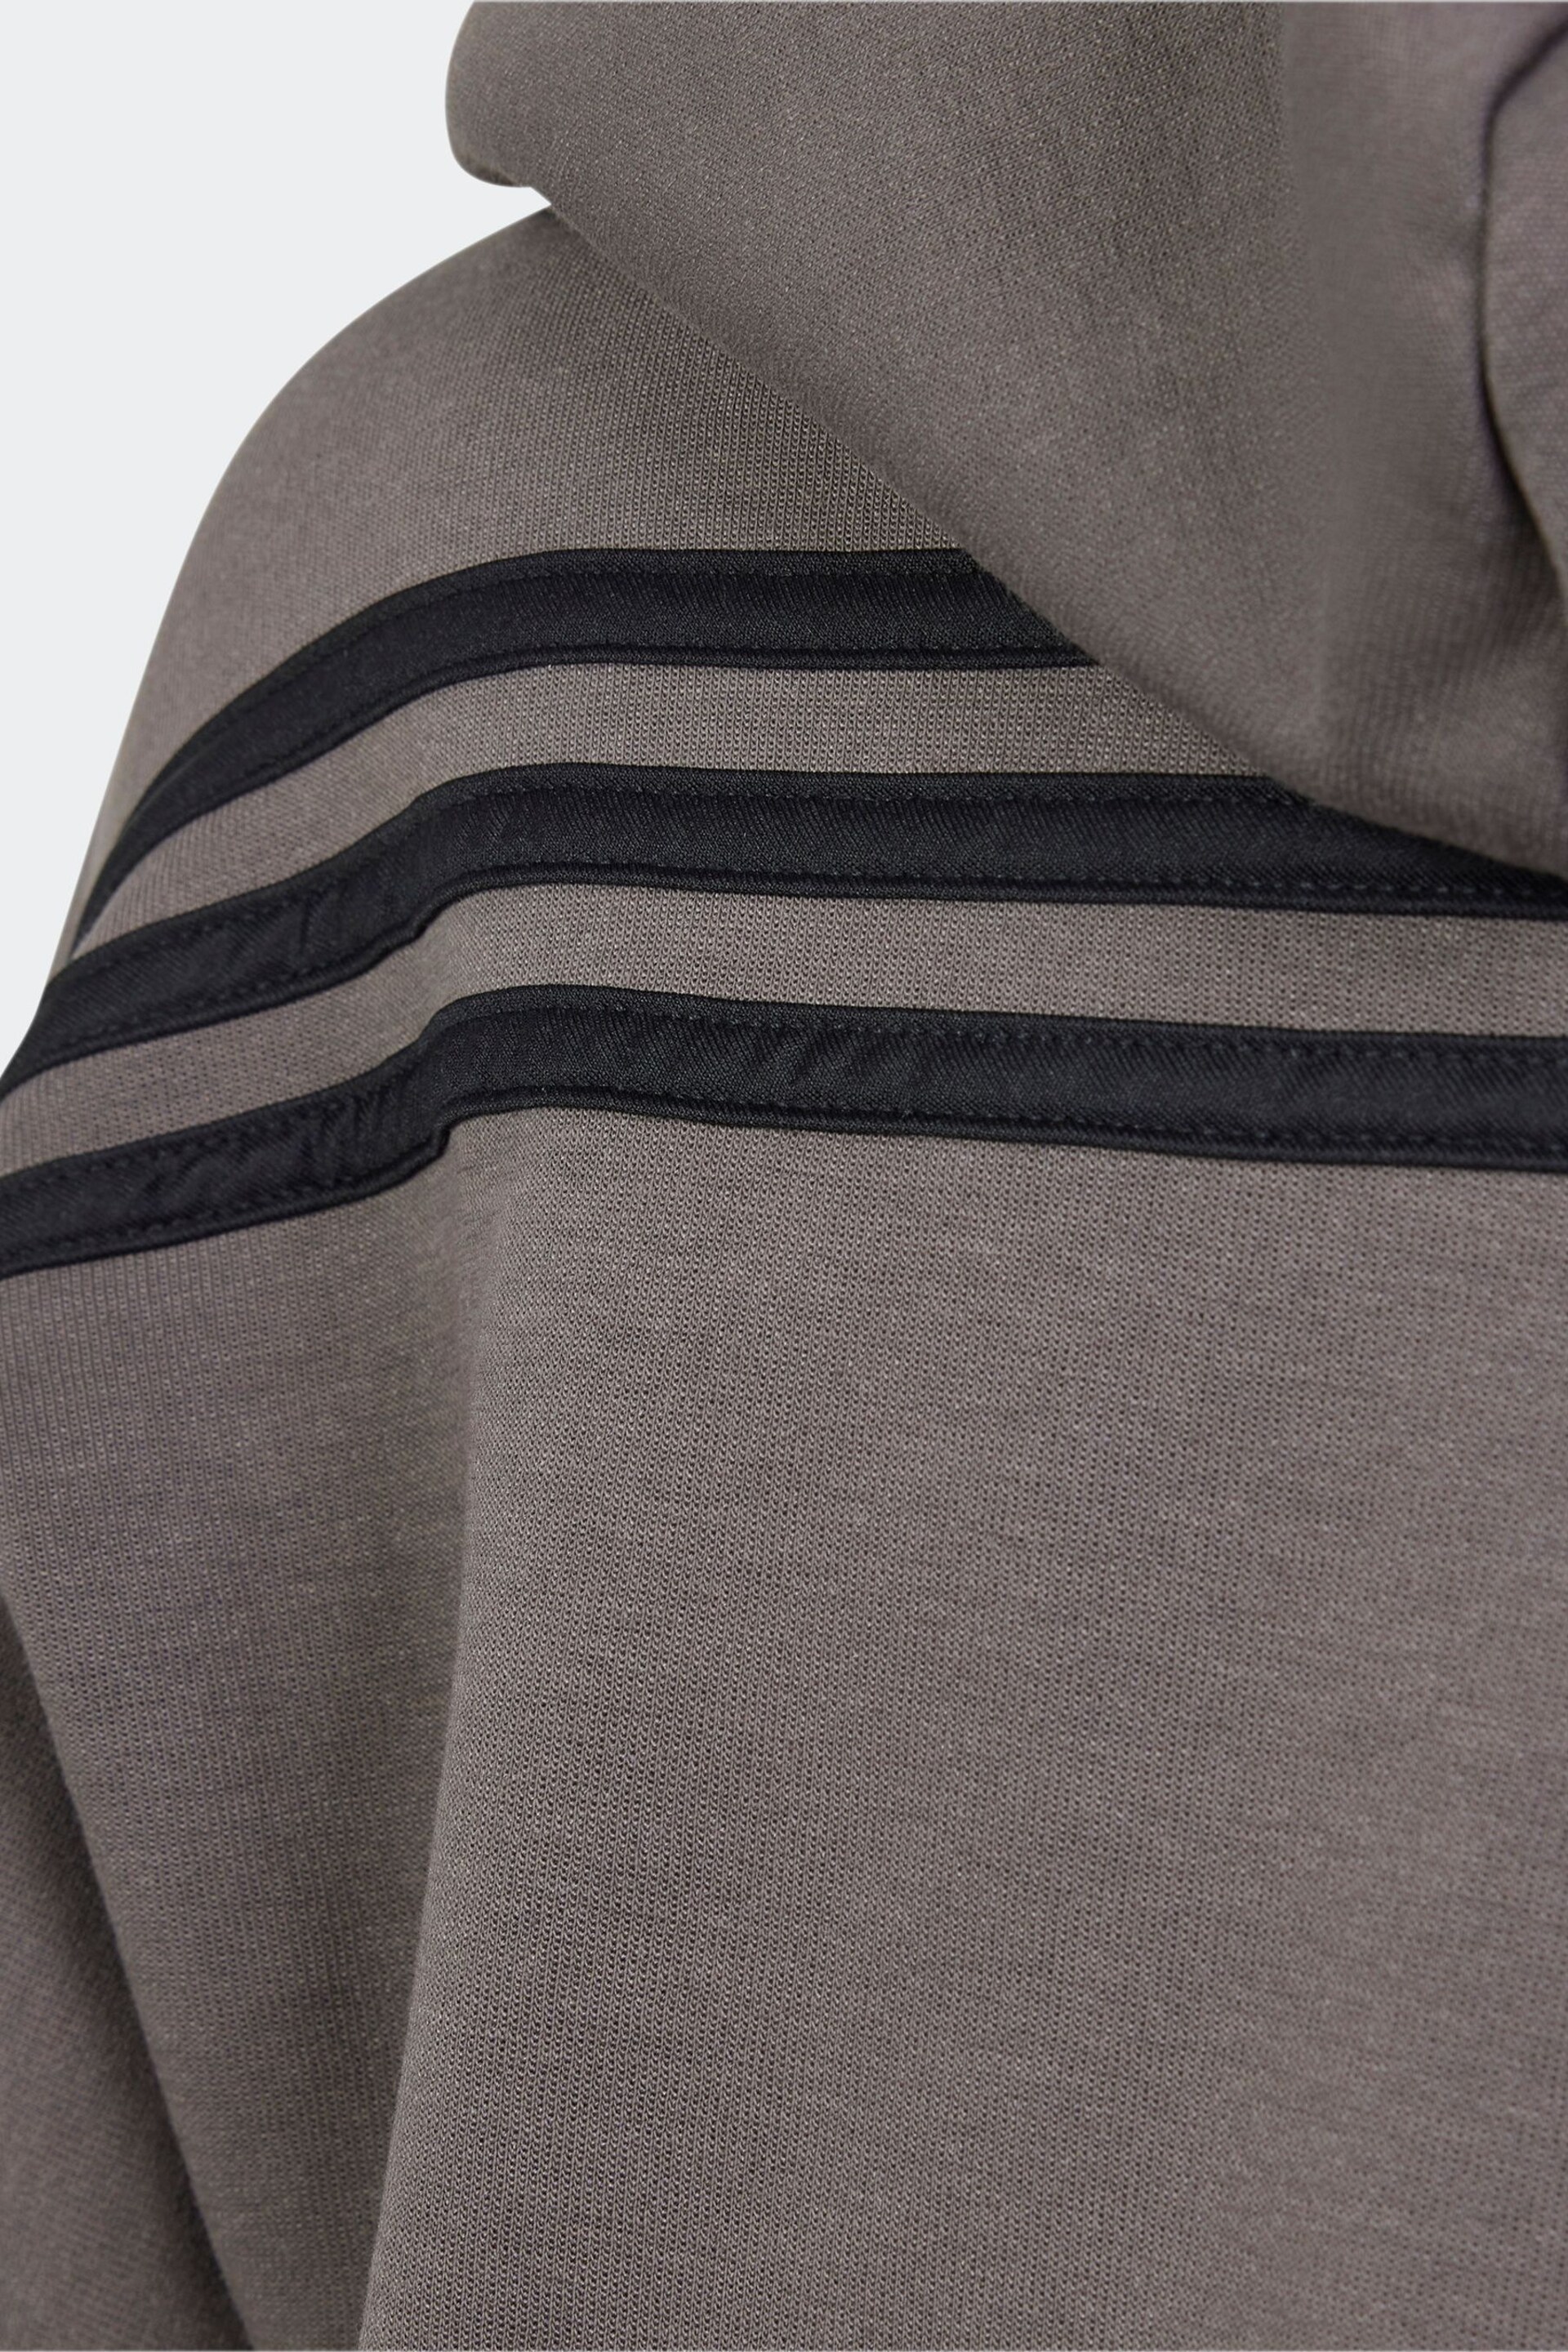 adidas Charcoal Grey Sportswear Future Icons 3-Stripes Full-Zip Hooded Track Top - Image 5 of 5